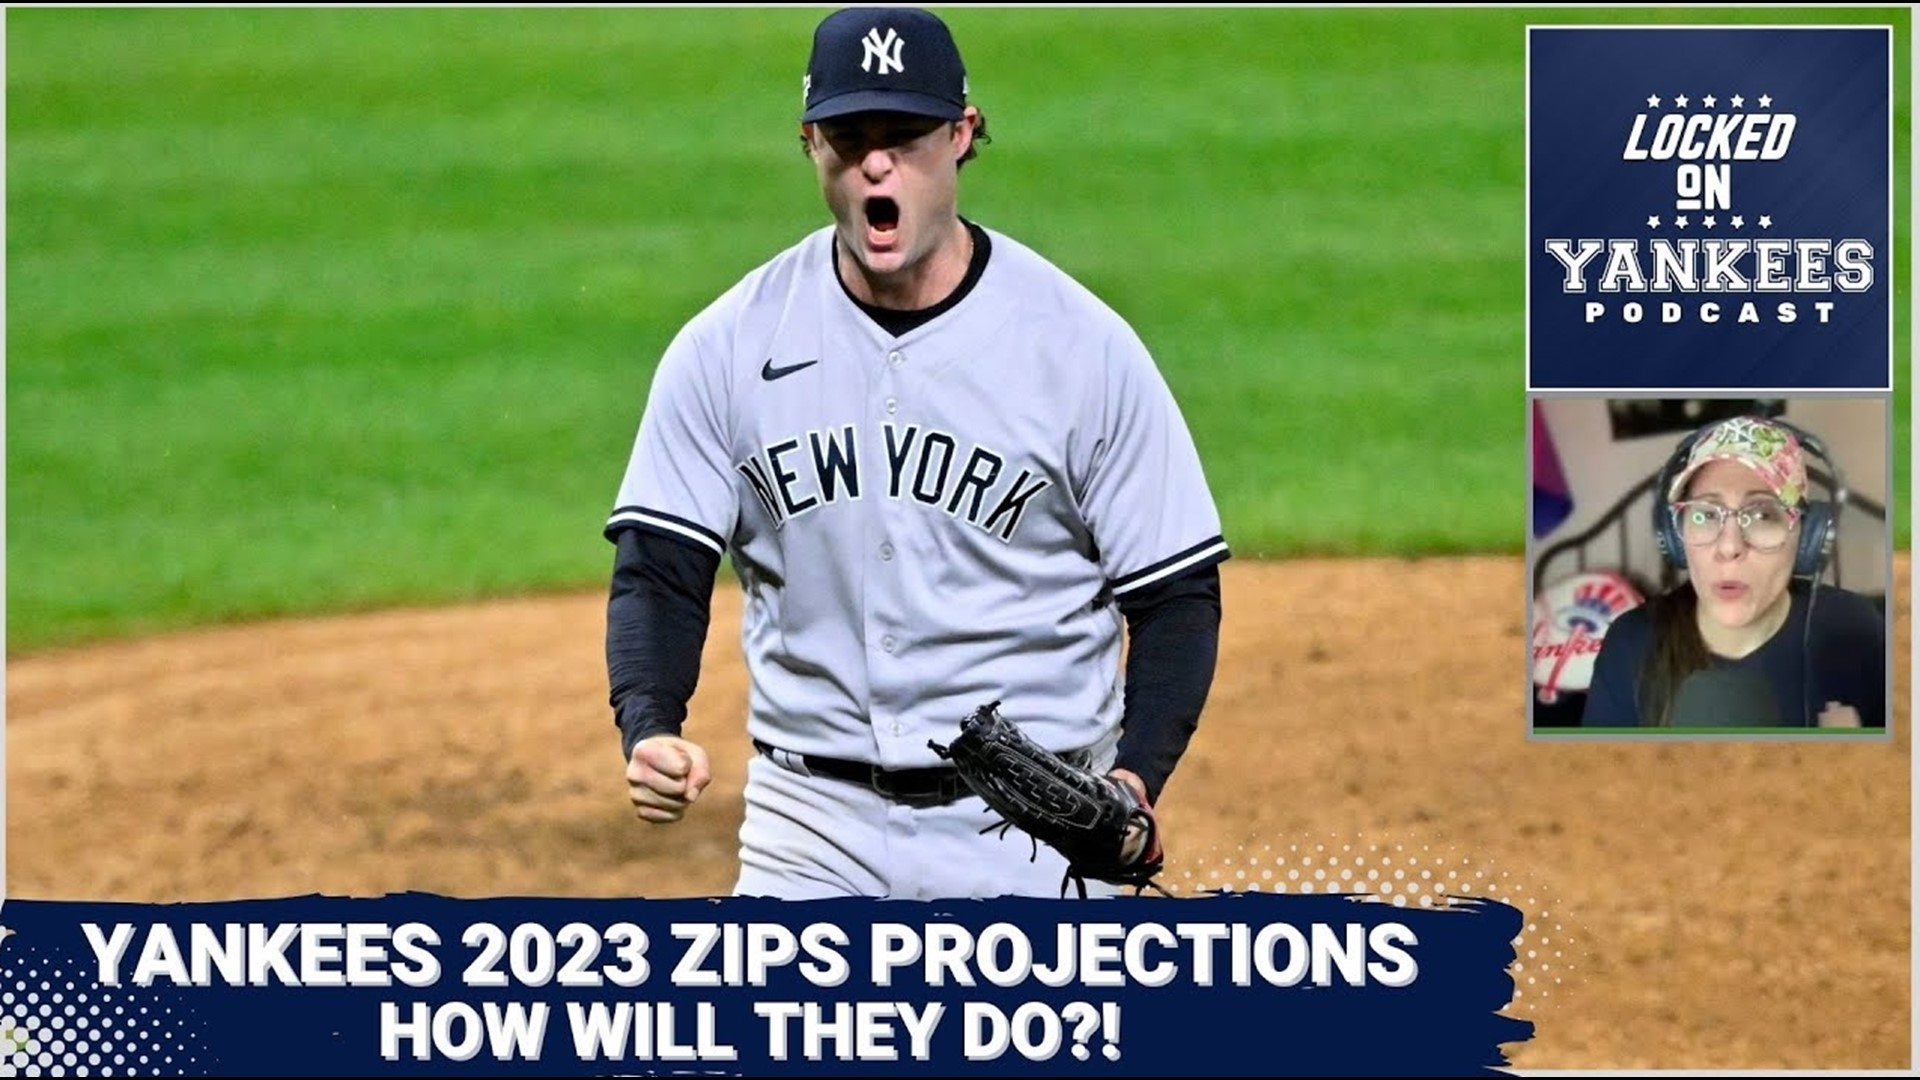 Fangraphs' annual ZiPS projections are out for the 2023 New York Yankees. How many home runs will Aaron Judge hit? Will Josh Donaldson have a bounce-back?